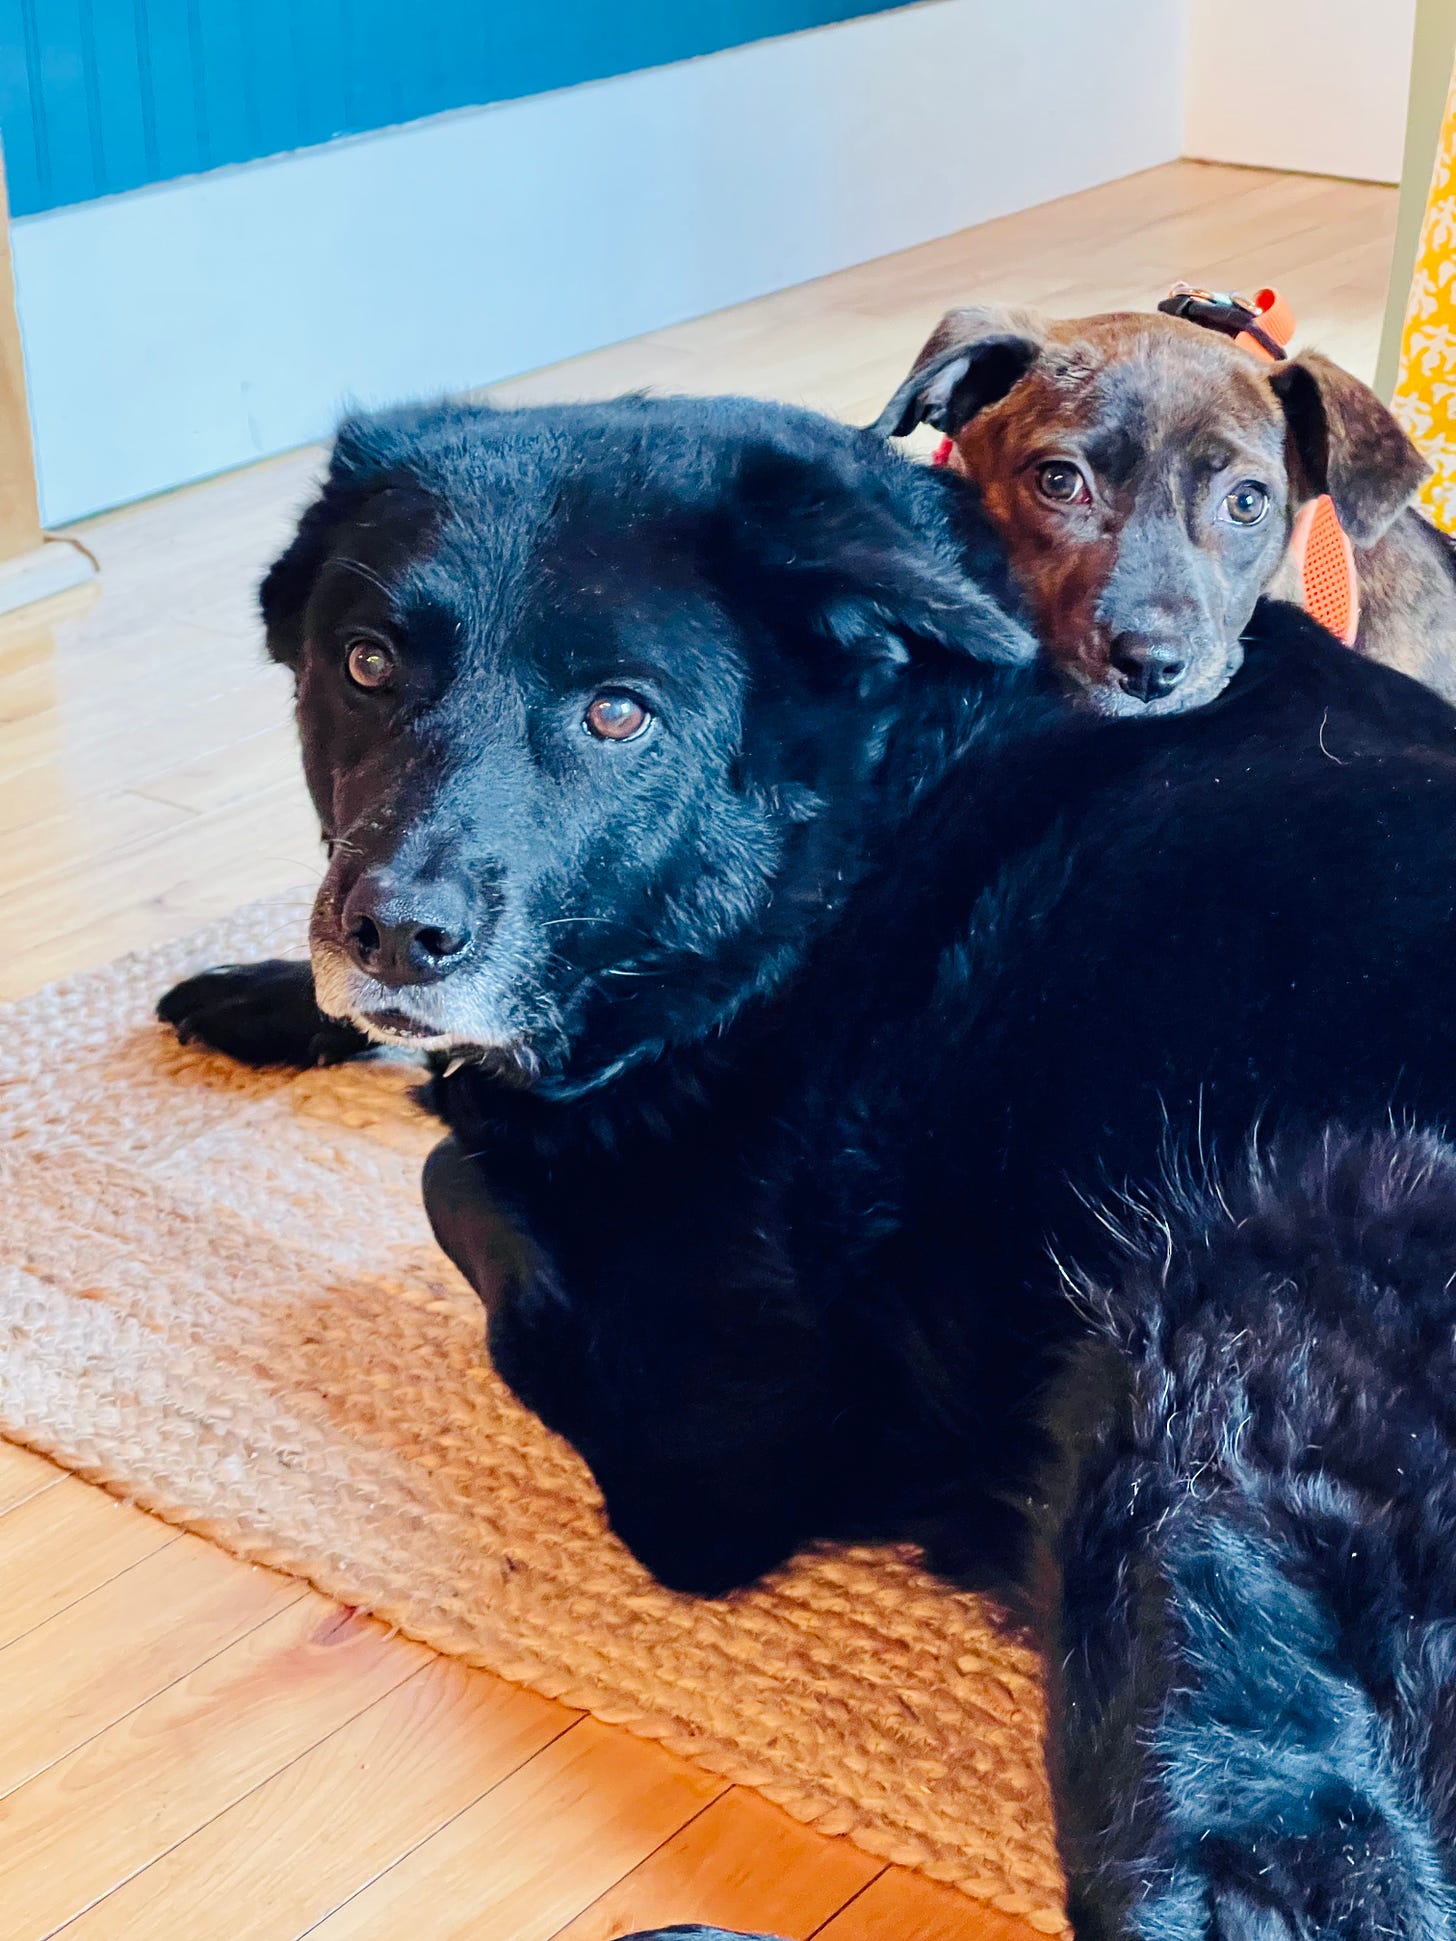 Two dogs on a floor. The puppy's head is on top of the older, large dog's back